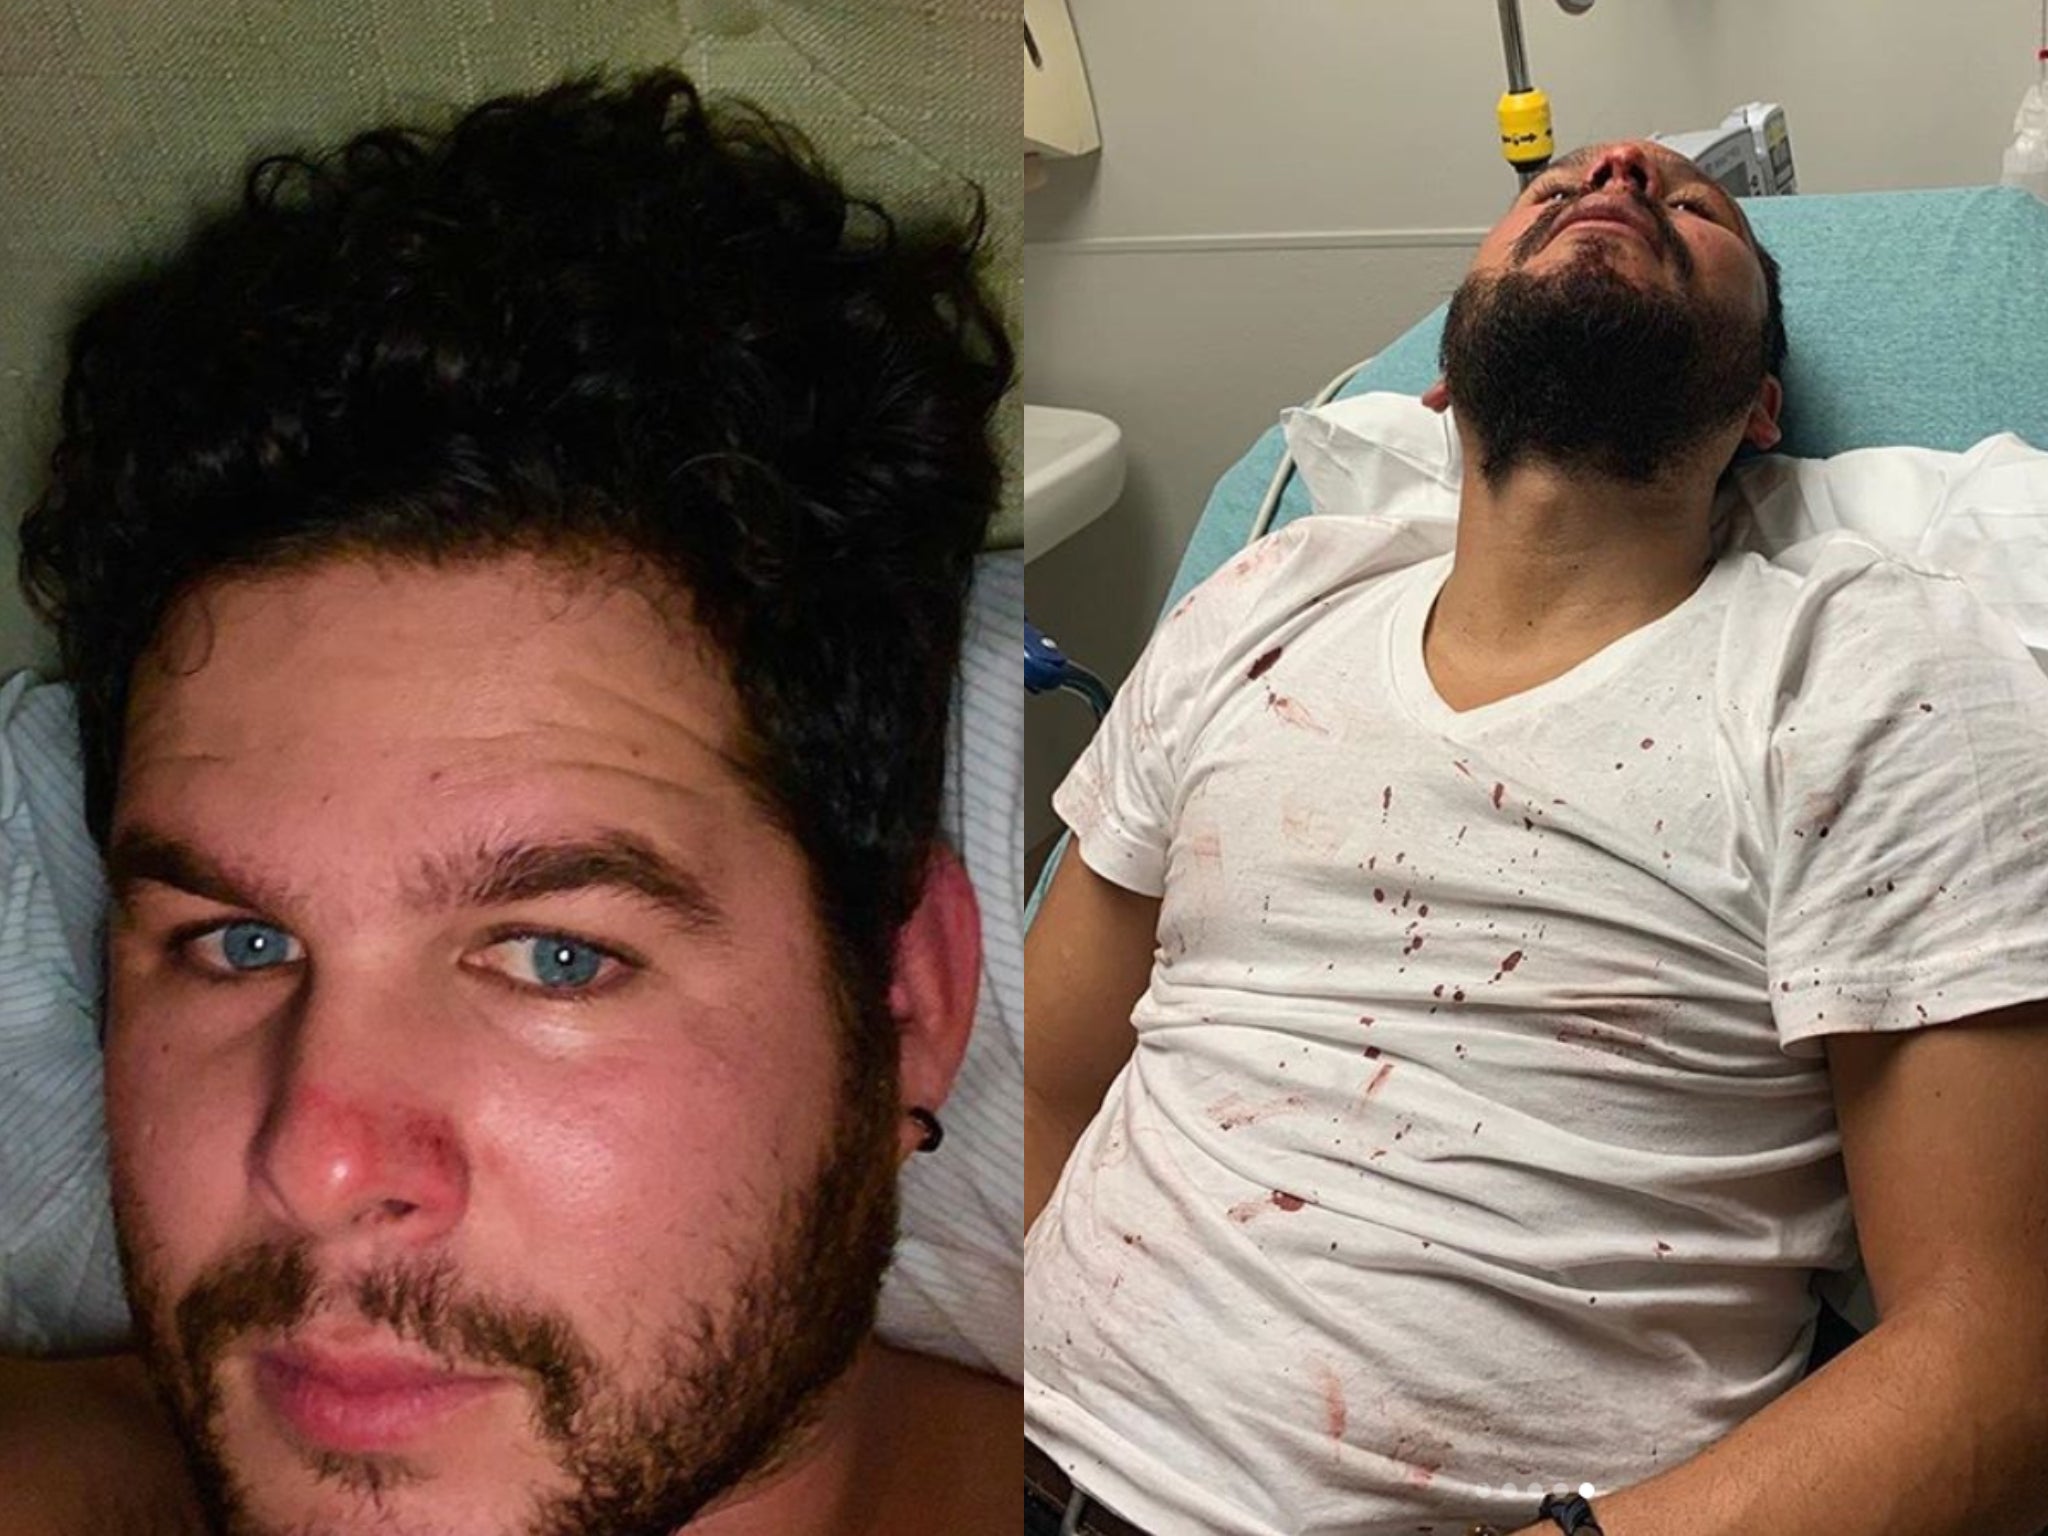 The Mavericks trumpet player Lorenzo Molina was assaulted in a Tennessee sports bar